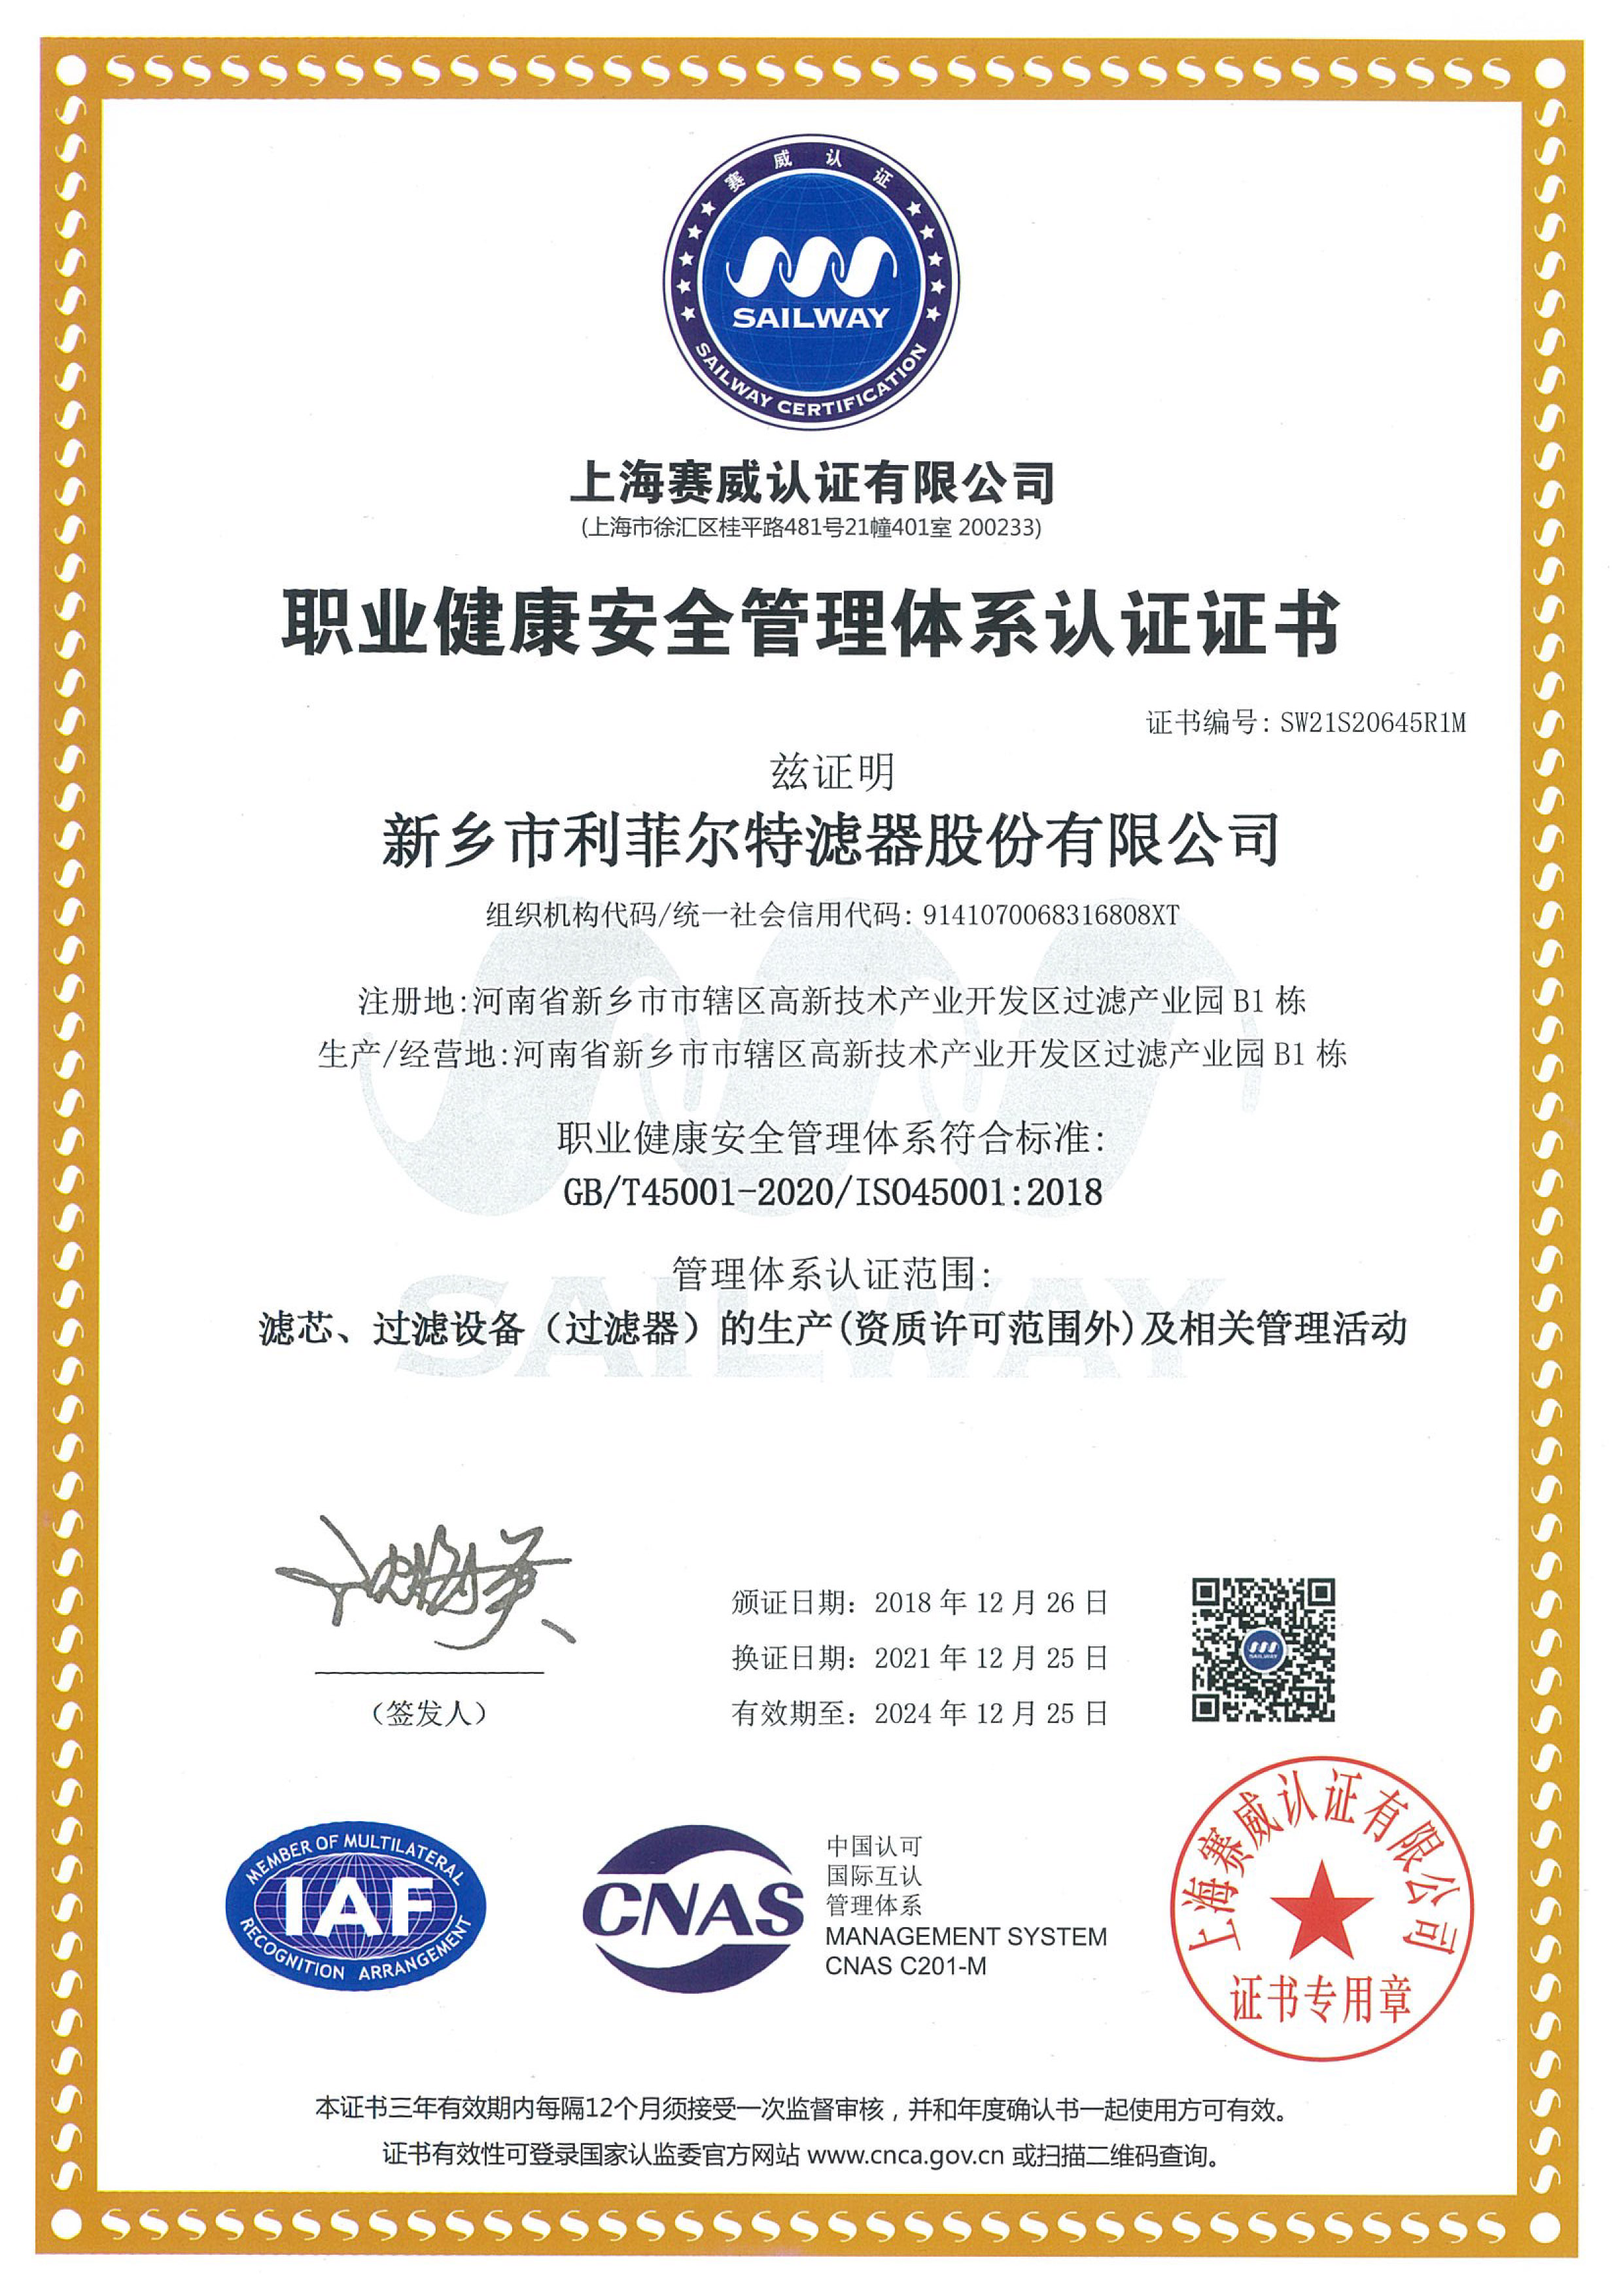 Honorary Certificate: Occupational Health and Safety Management System Certificate